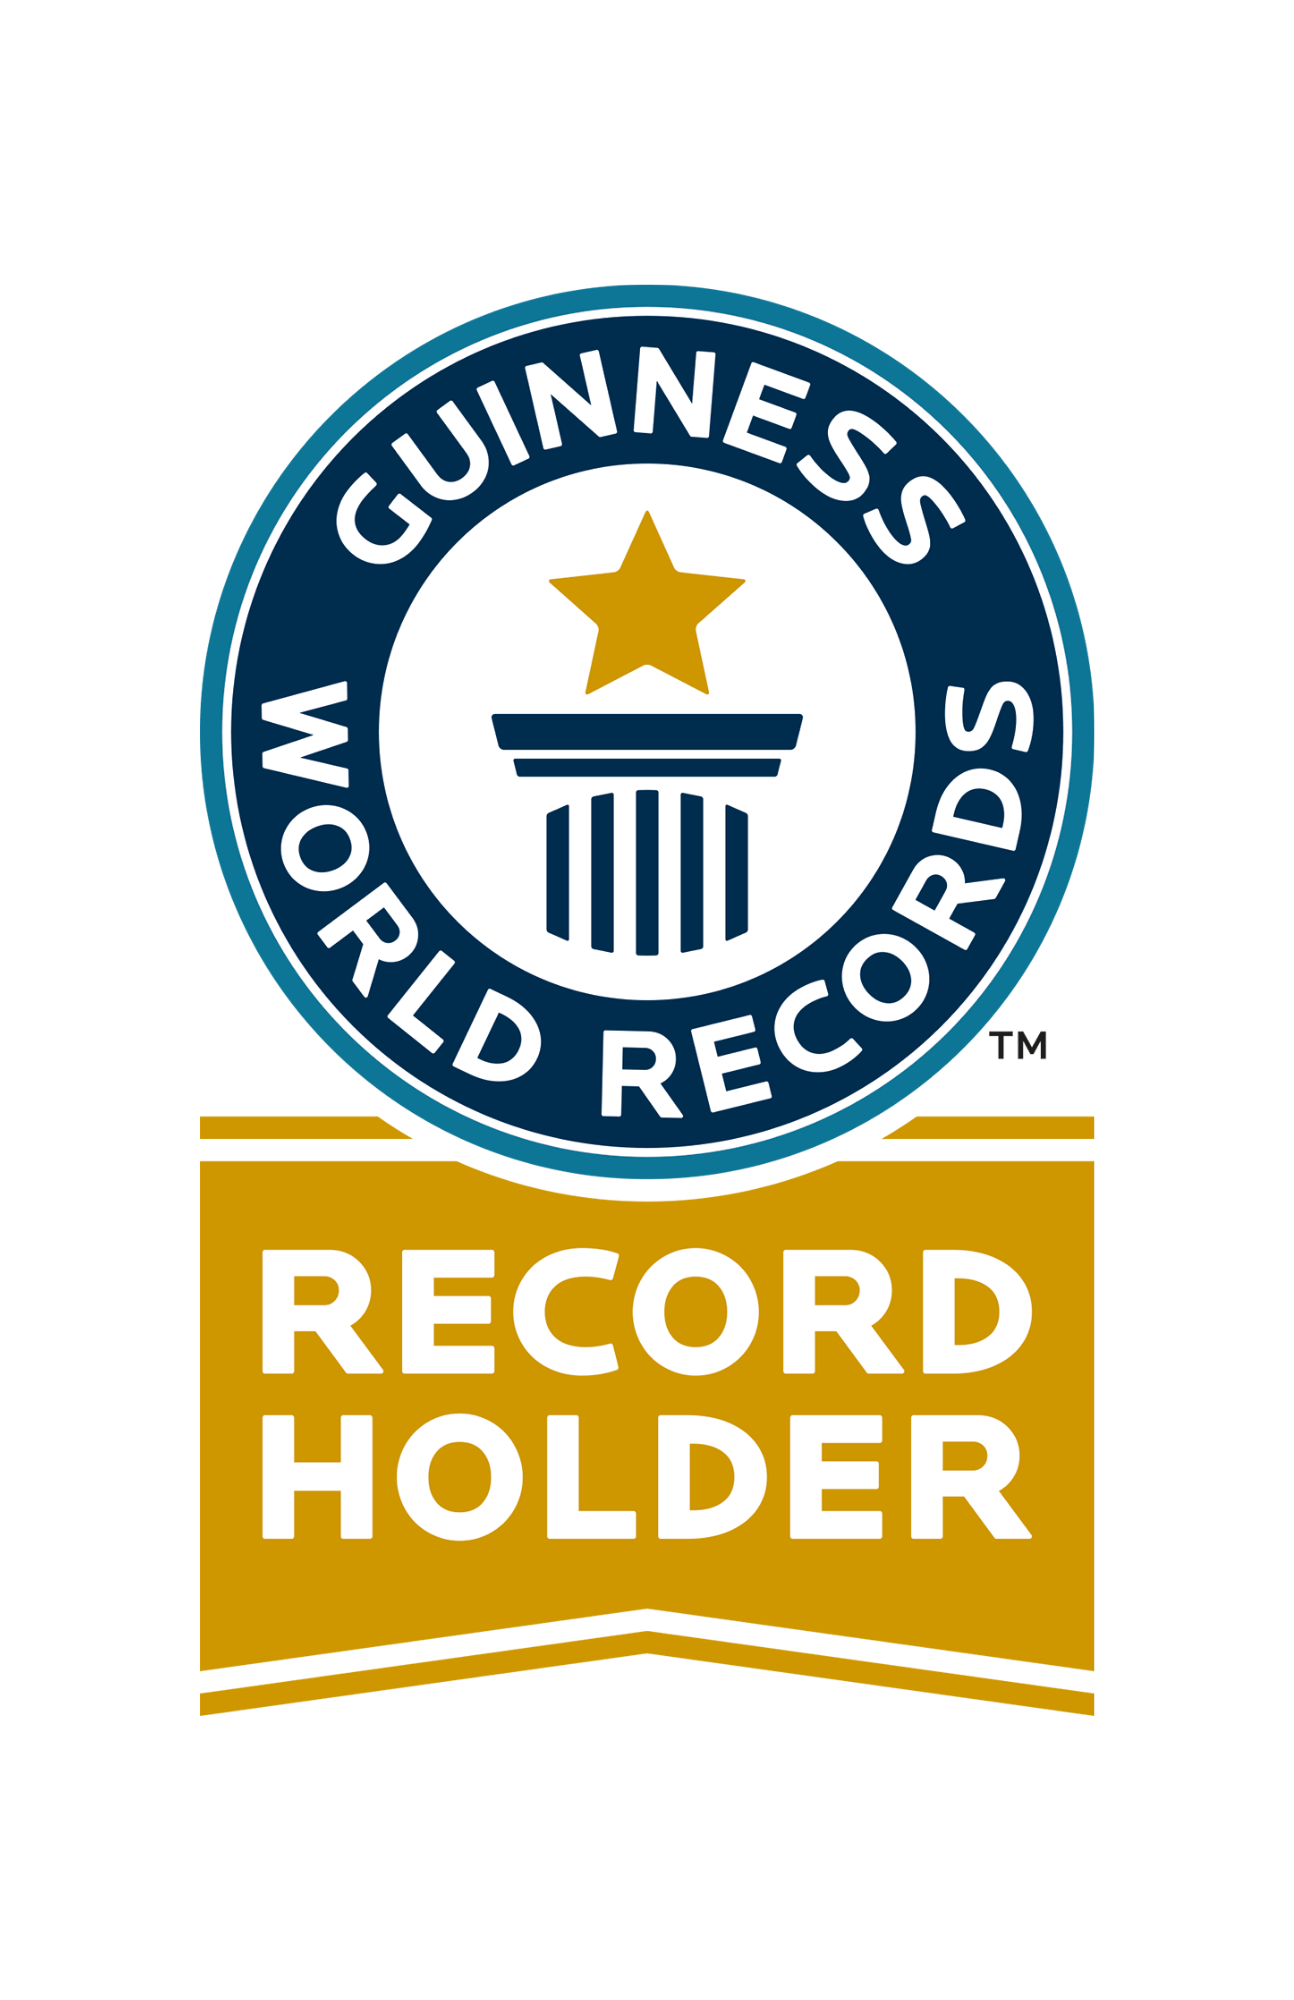 Guiness World Records - Official Record Holder